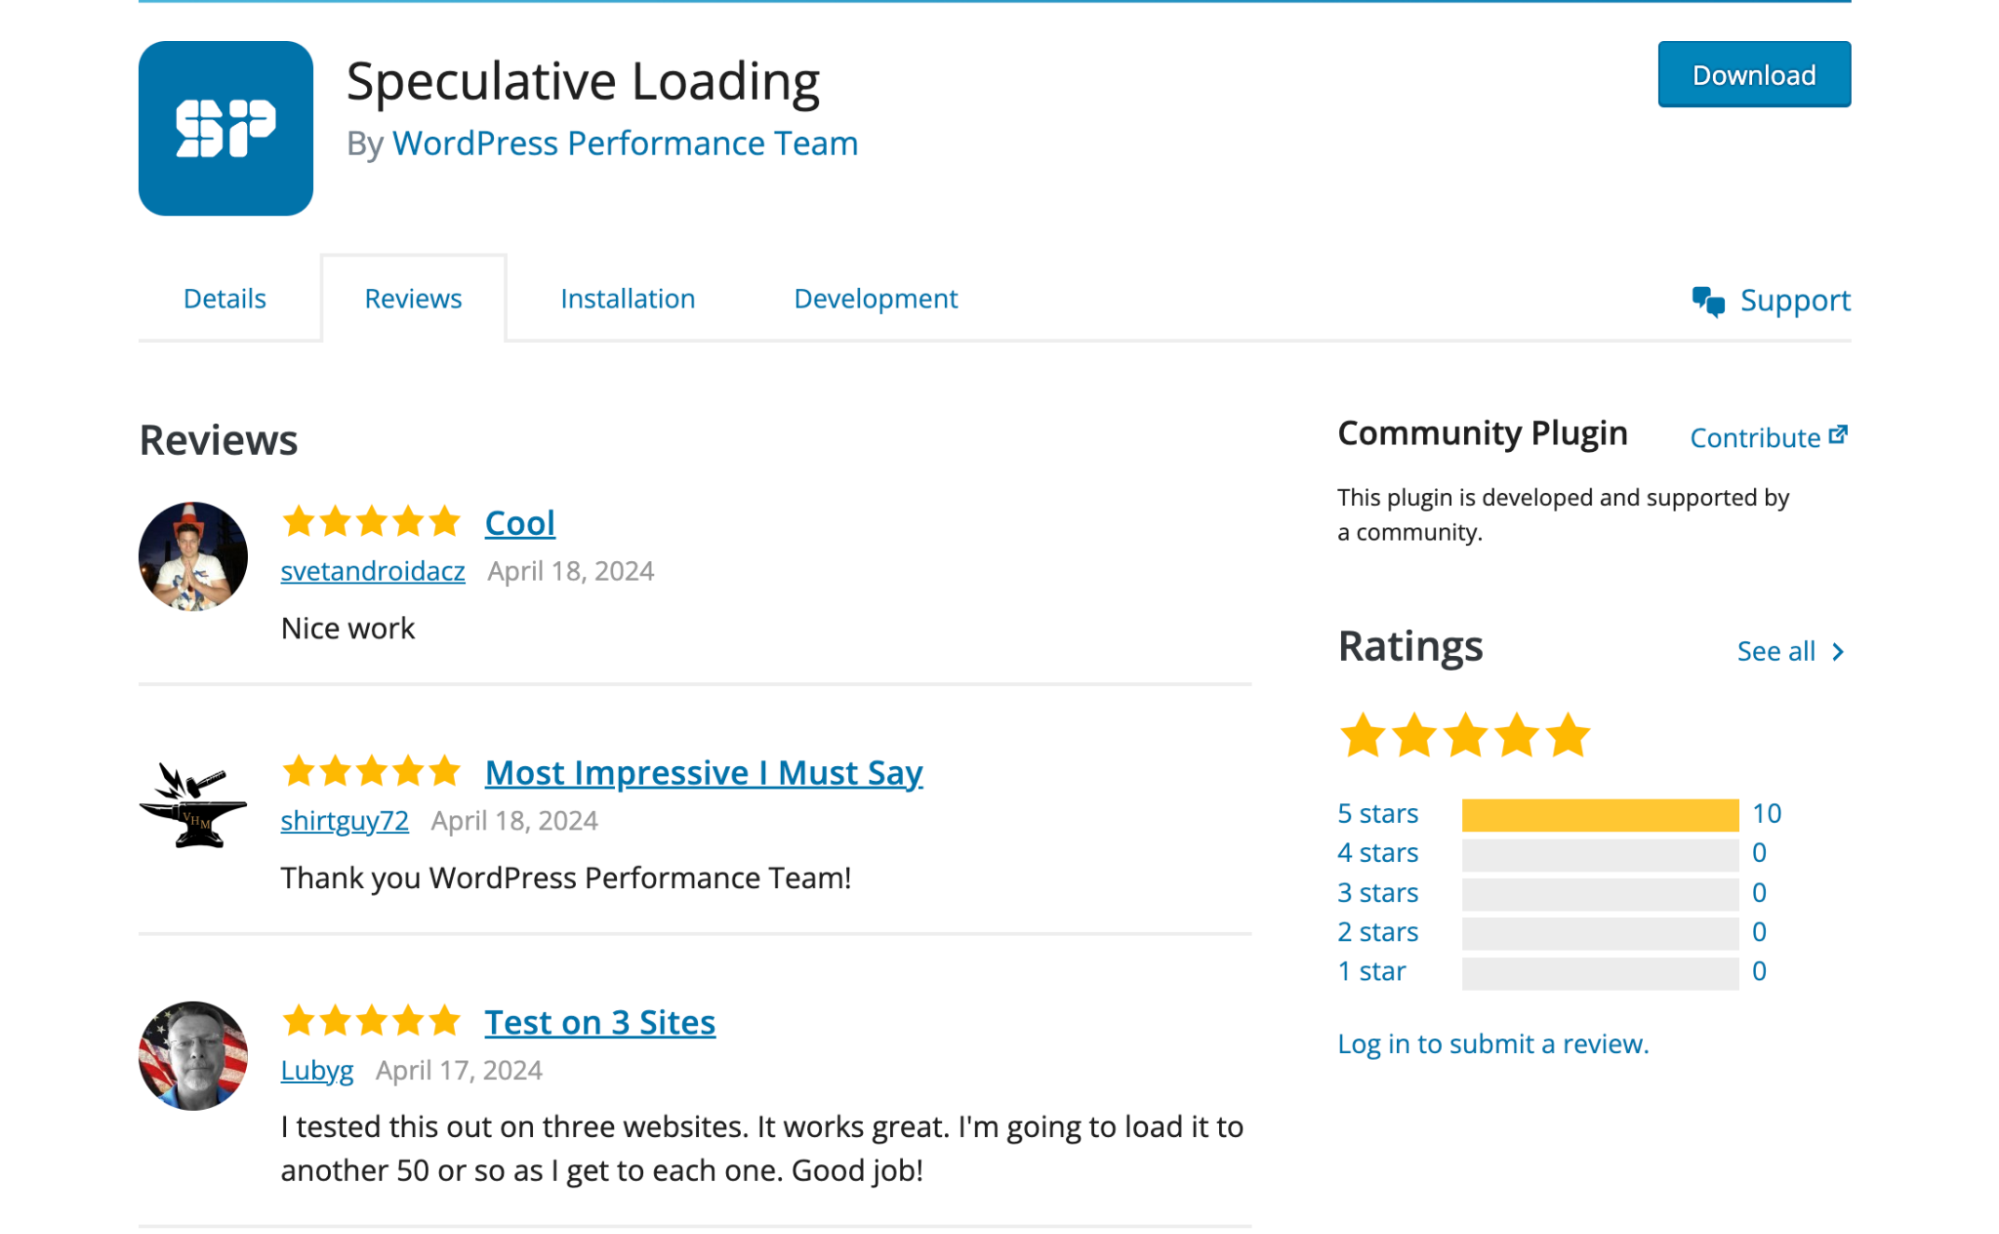 Reviews from the WordPress community for the Speculative Loading plugin